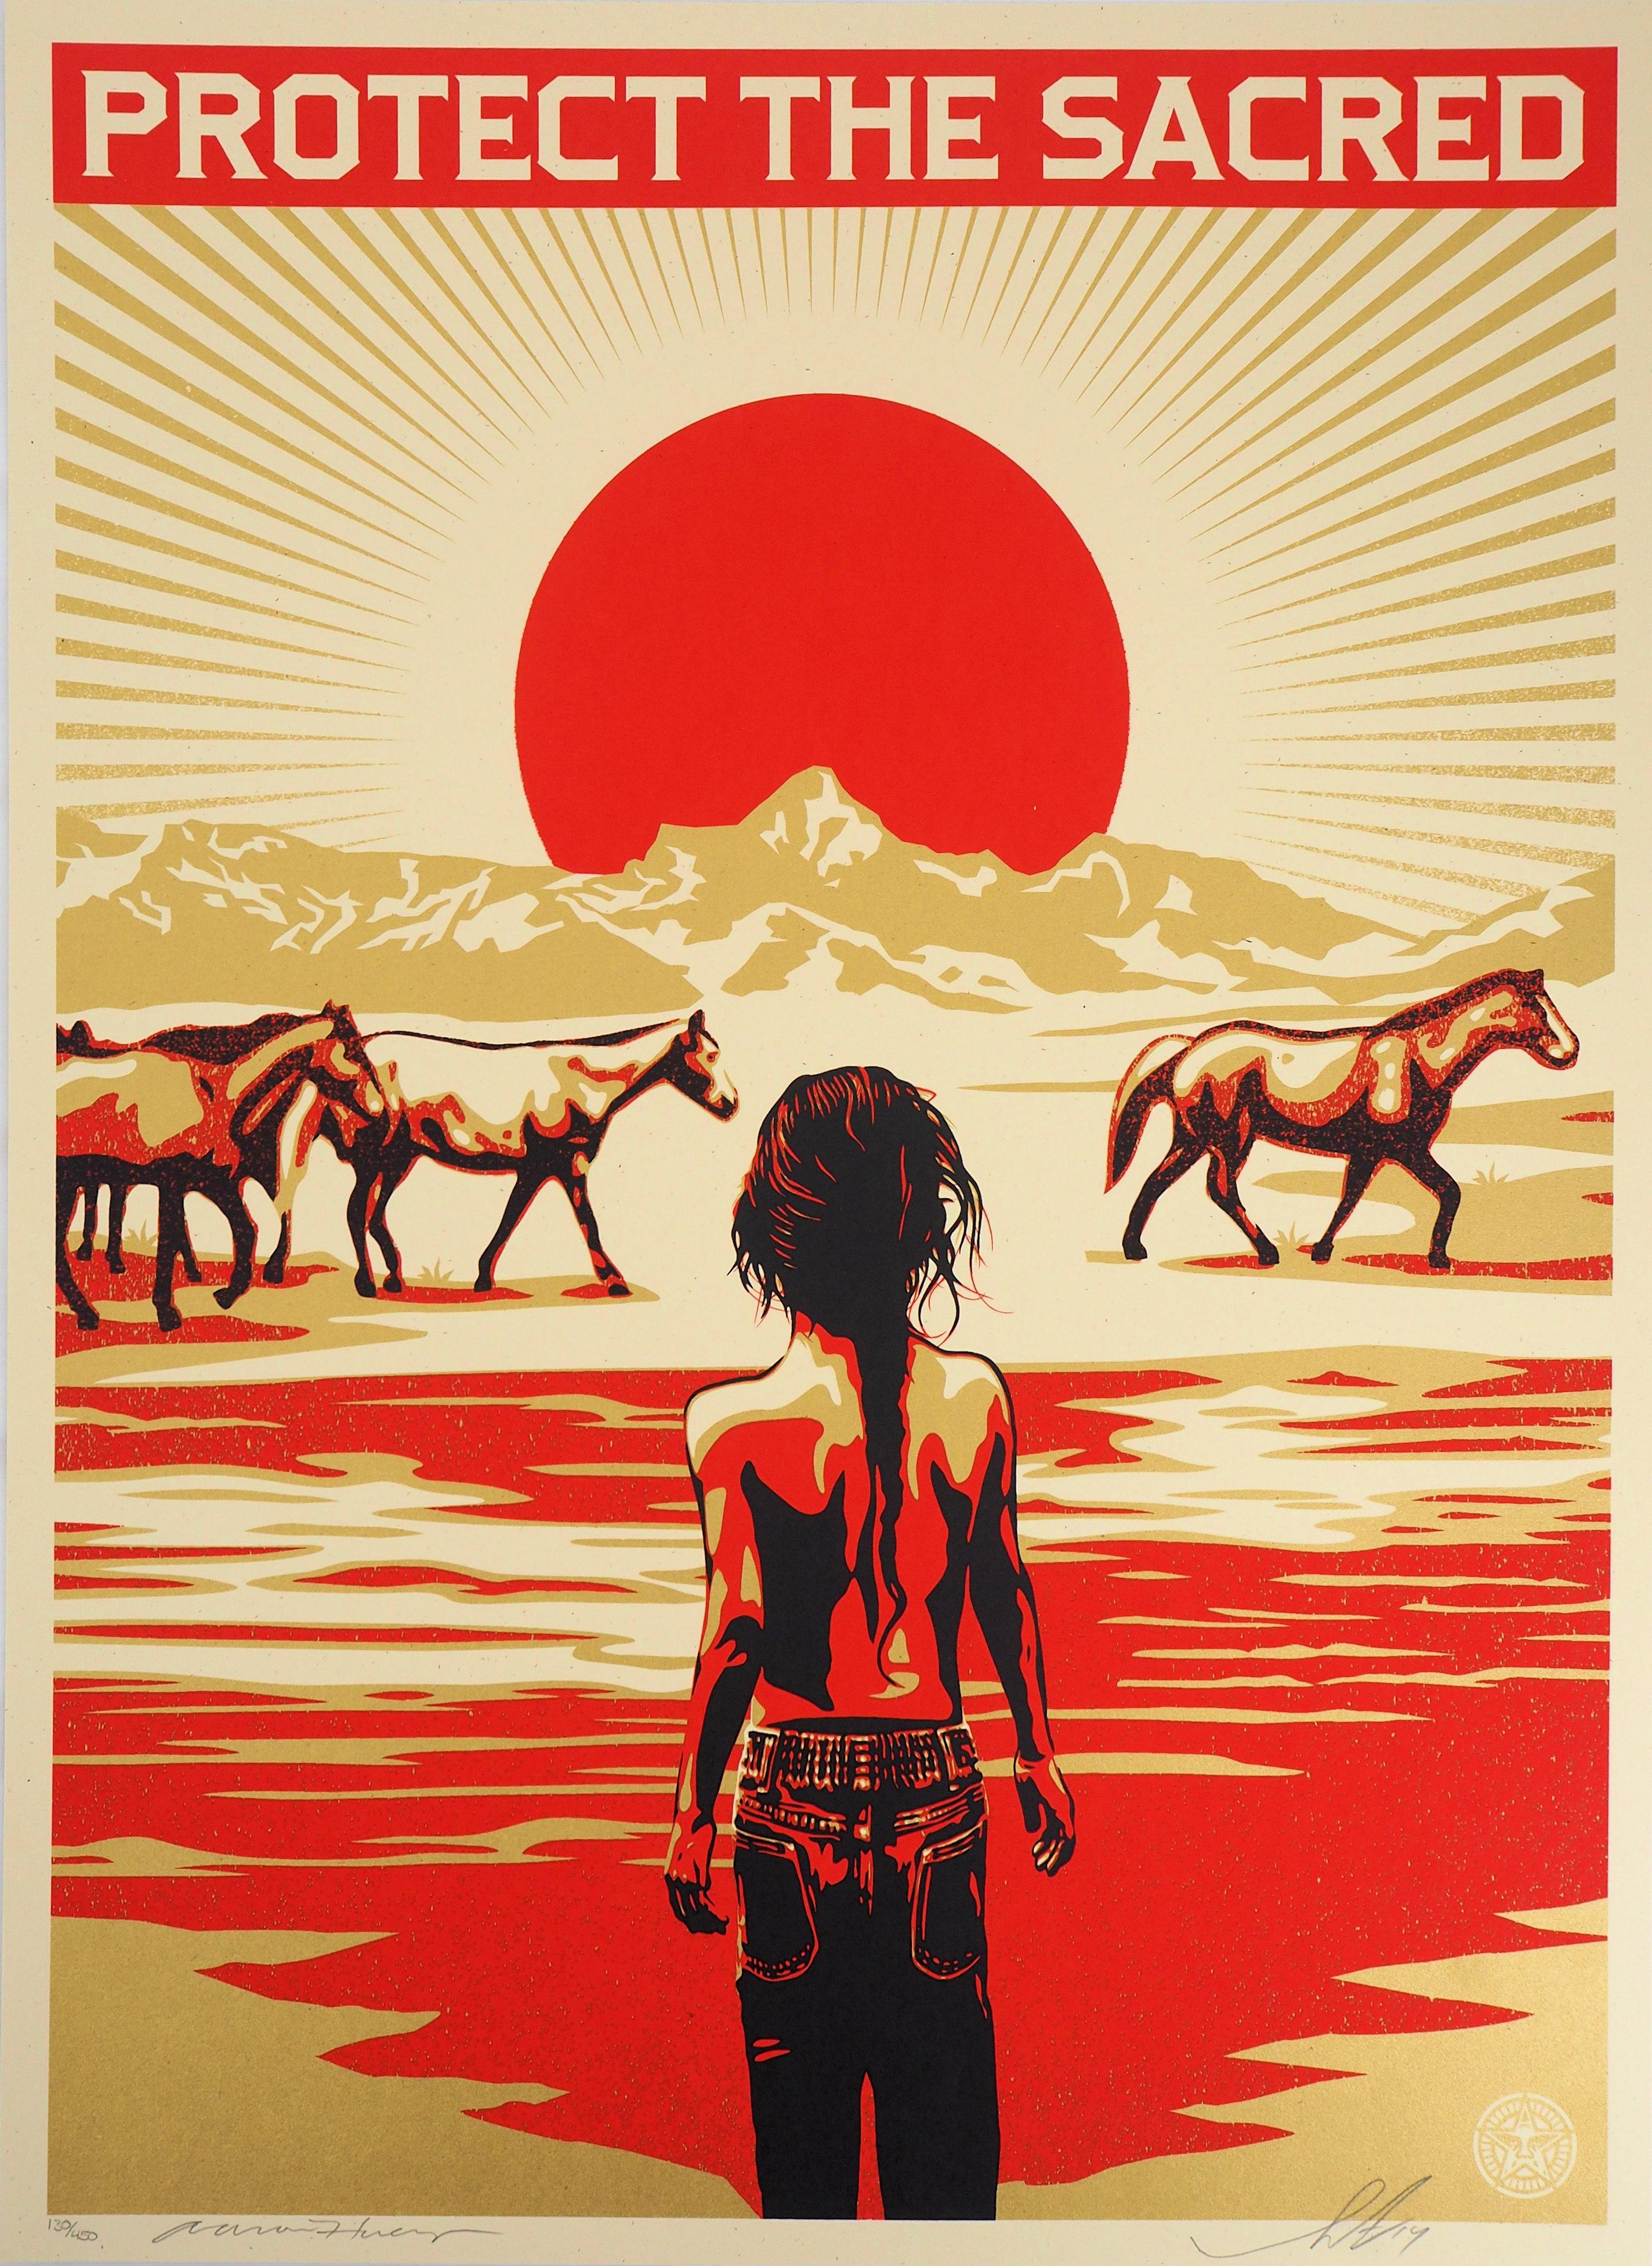 Shepard Fairey Landscape Print - Protect the Sacred - Original Handsigned and Numbered Screen Print